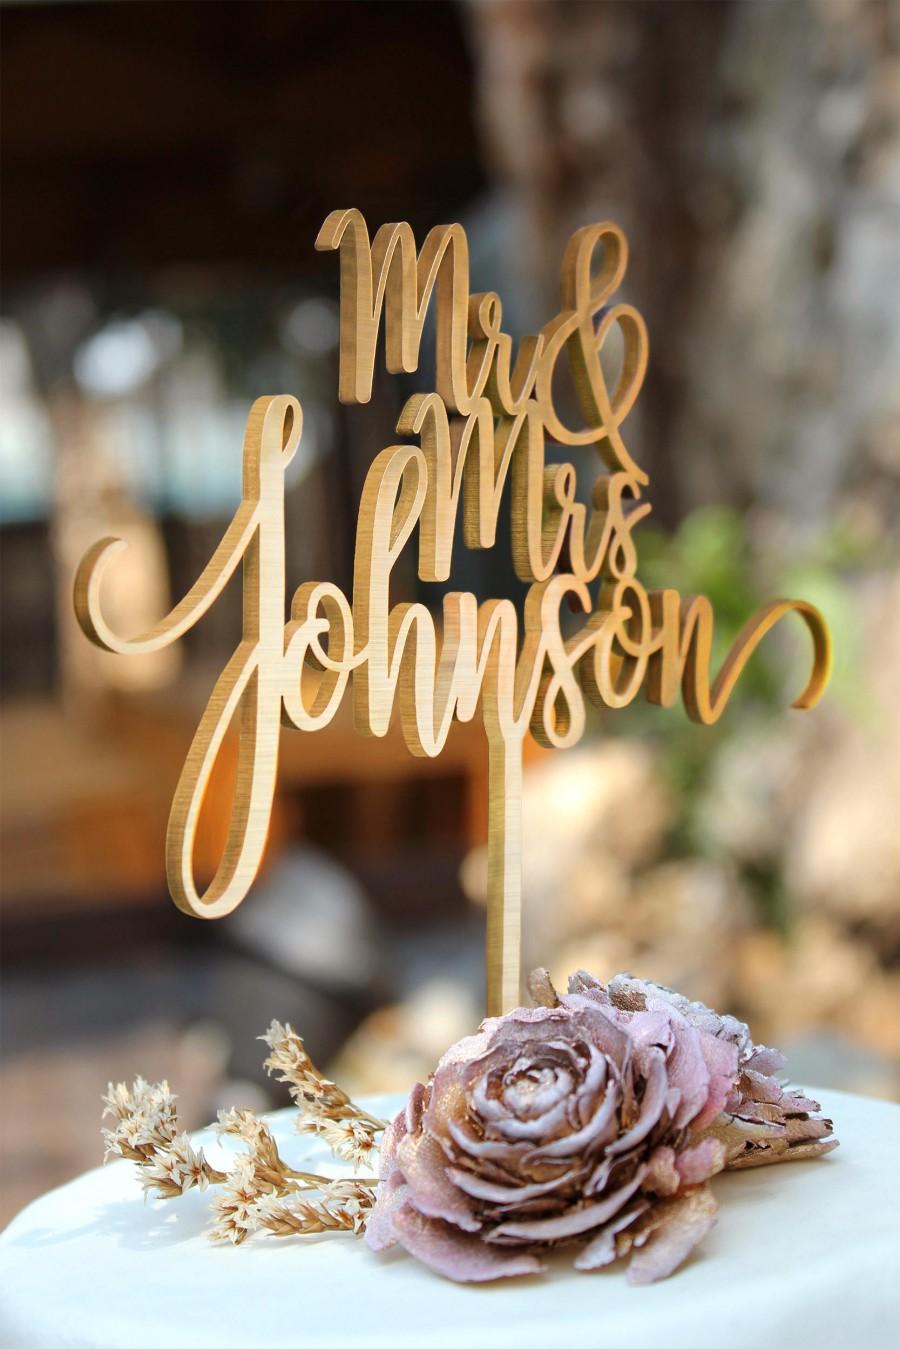 Hochzeit - Personalized Cake Topper for Wedding, Custom Personalized Wedding Cake Topper, Customized Wedding Cake Topper, Mr and Mrs Cake Topper 29